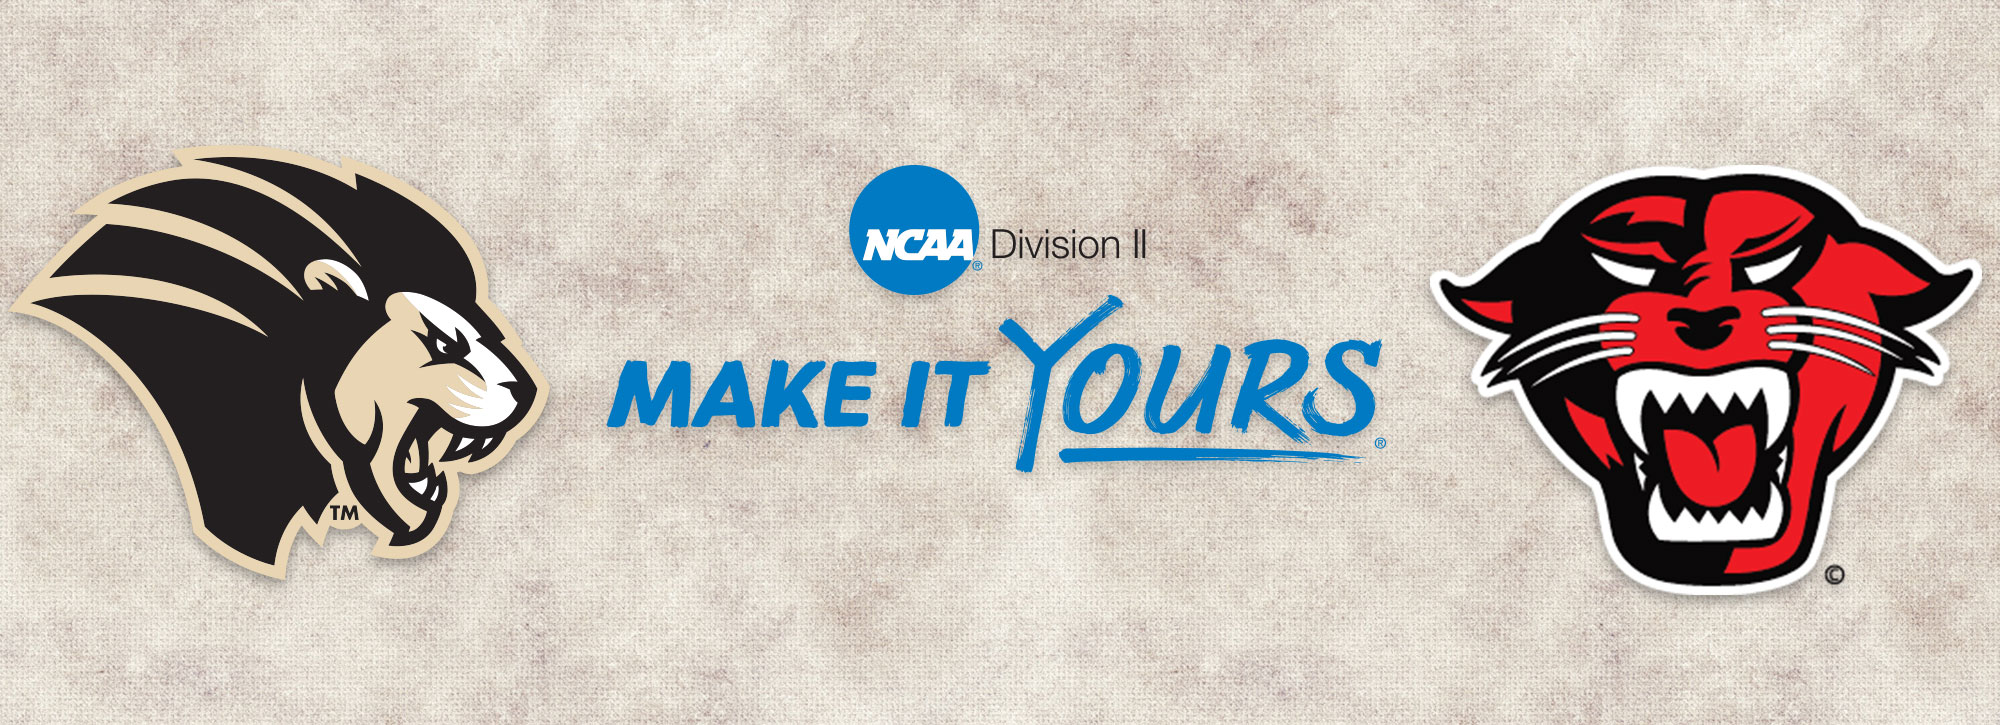 Davenport & Purdue Northwest Advance to Year Two of NCAA Division II Membership Process